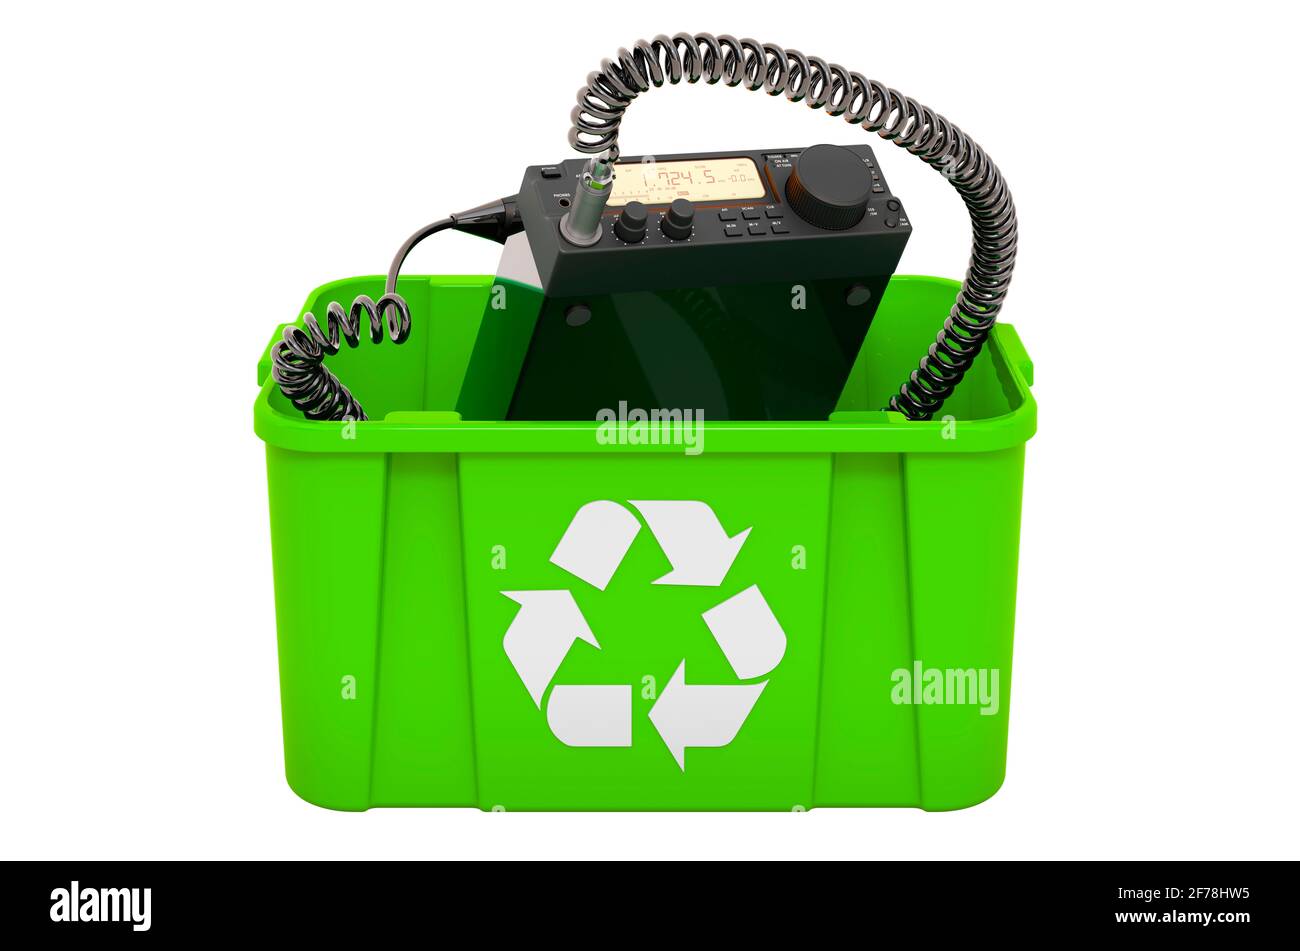 Recycling trashcan with amateur radio transceiver with push-to-talk  microphone switch. 3D rendering isolated on white background Stock Photo -  Alamy